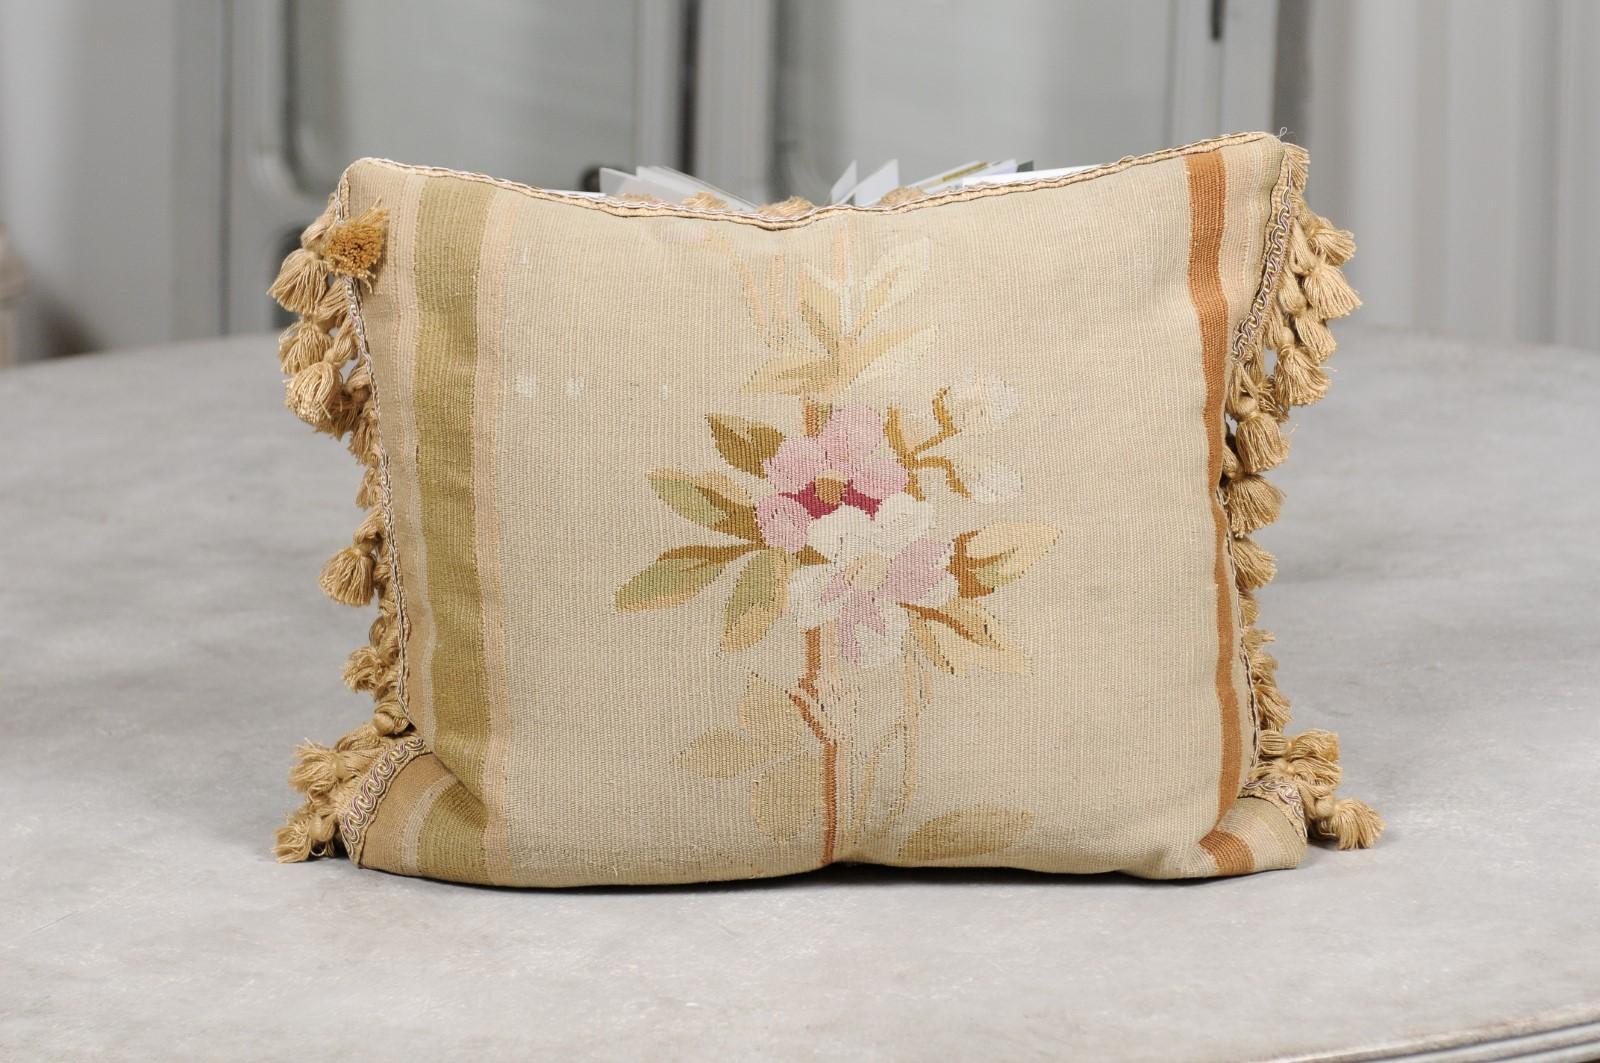 A French Aubusson tapestry pillow from the 19th century, with floral décor and tassels. Born during the 19th century in the Aubusson tapestry manufacture located in central France, this lovey pillow features a delicate décor showcasing a bouquet of